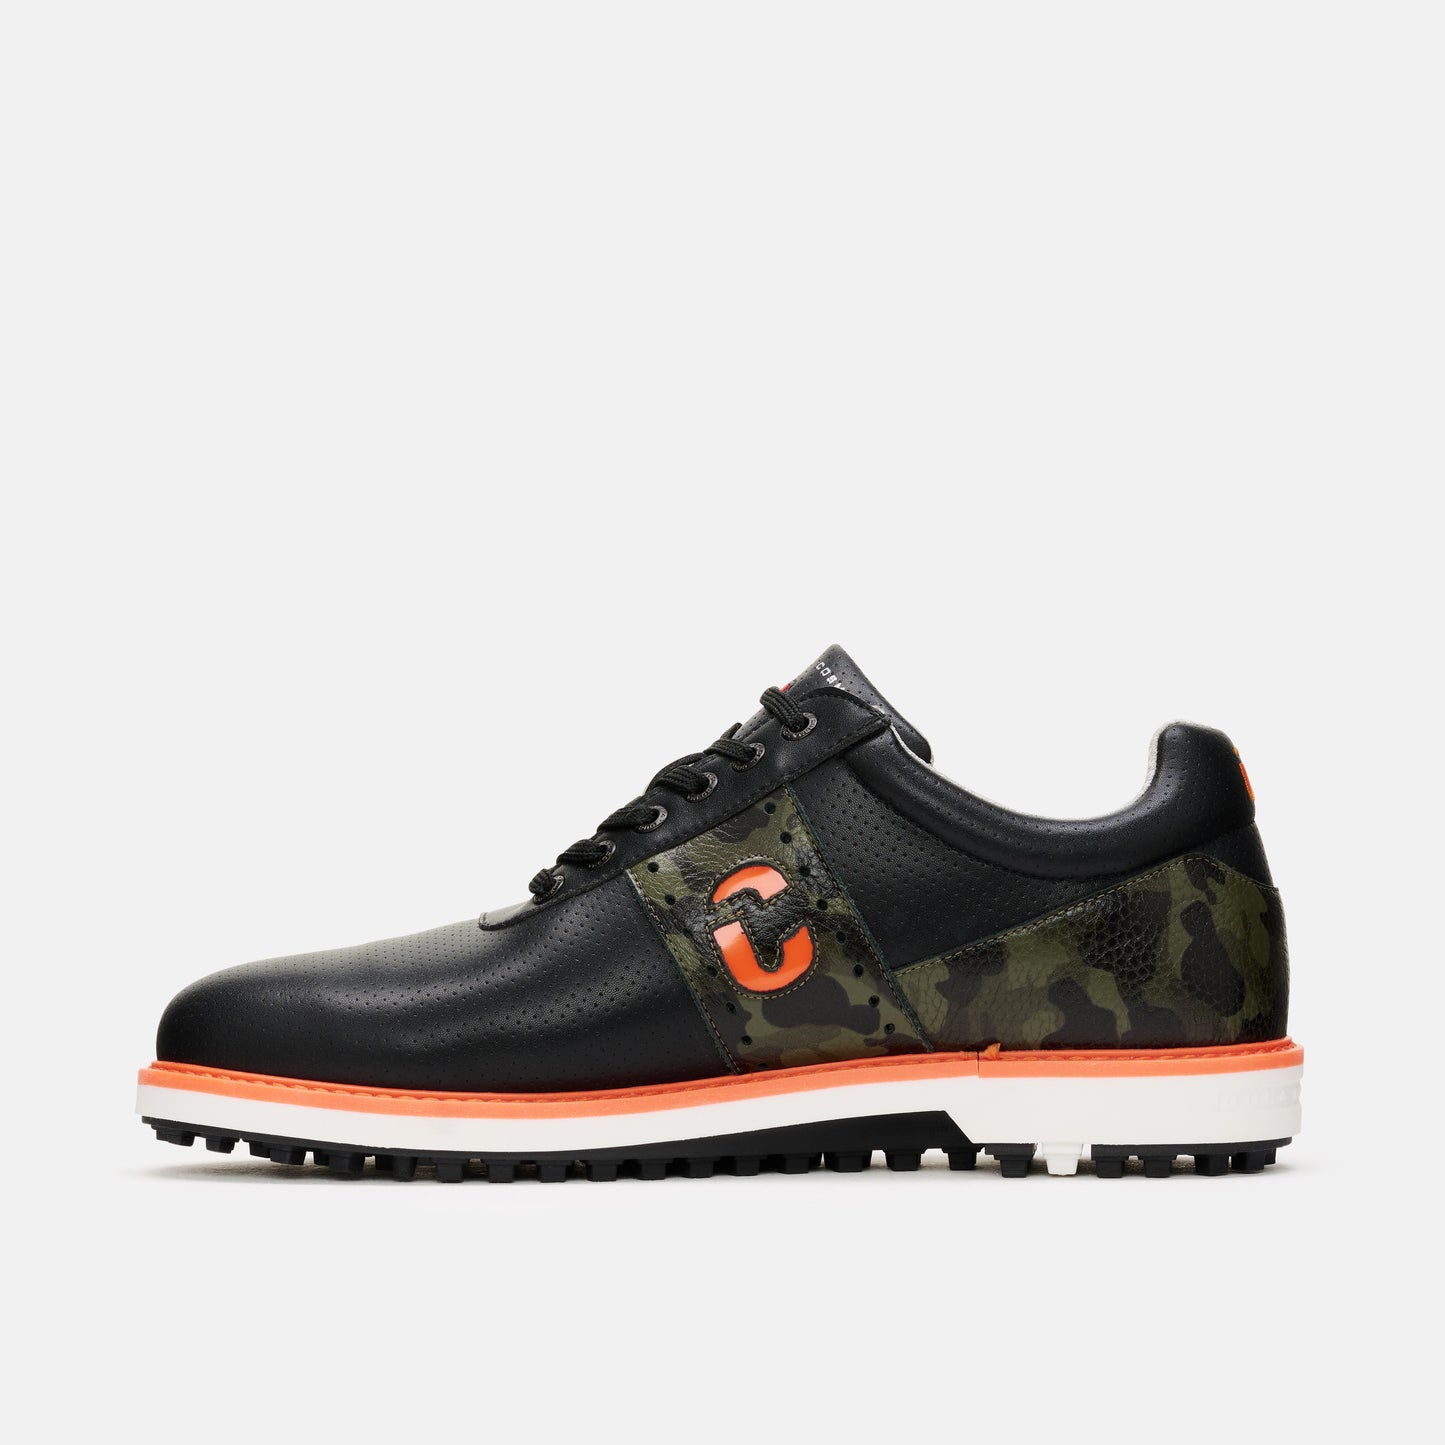 JL1 waterproof Black Men's Golf Shoe by Duca del Cosma is made by a tour player for the best